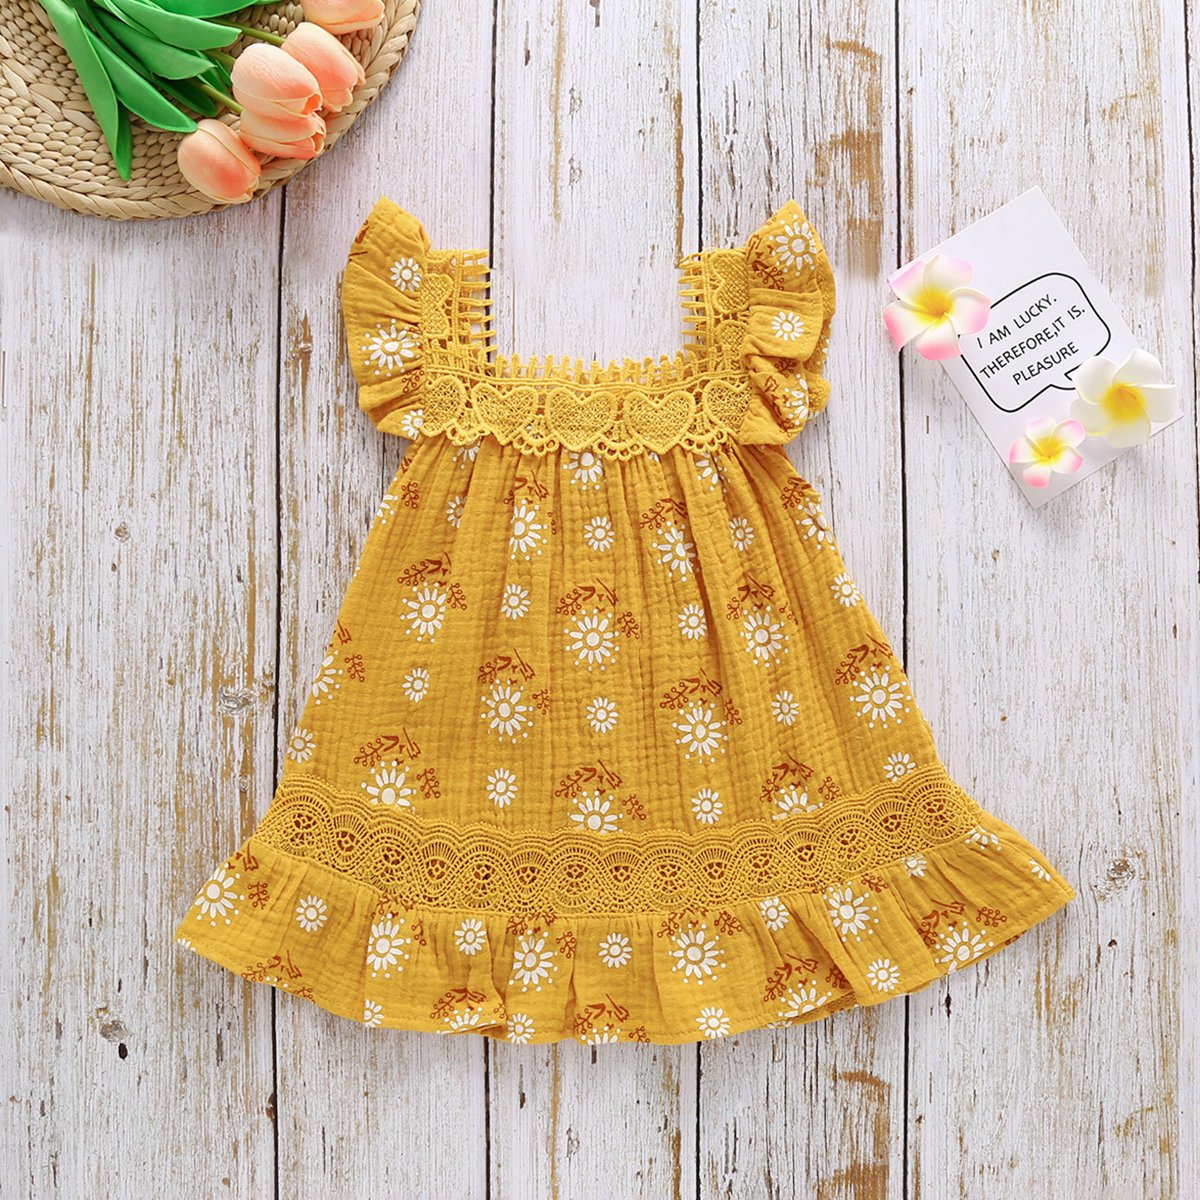 Baby Girl Floral Dress.